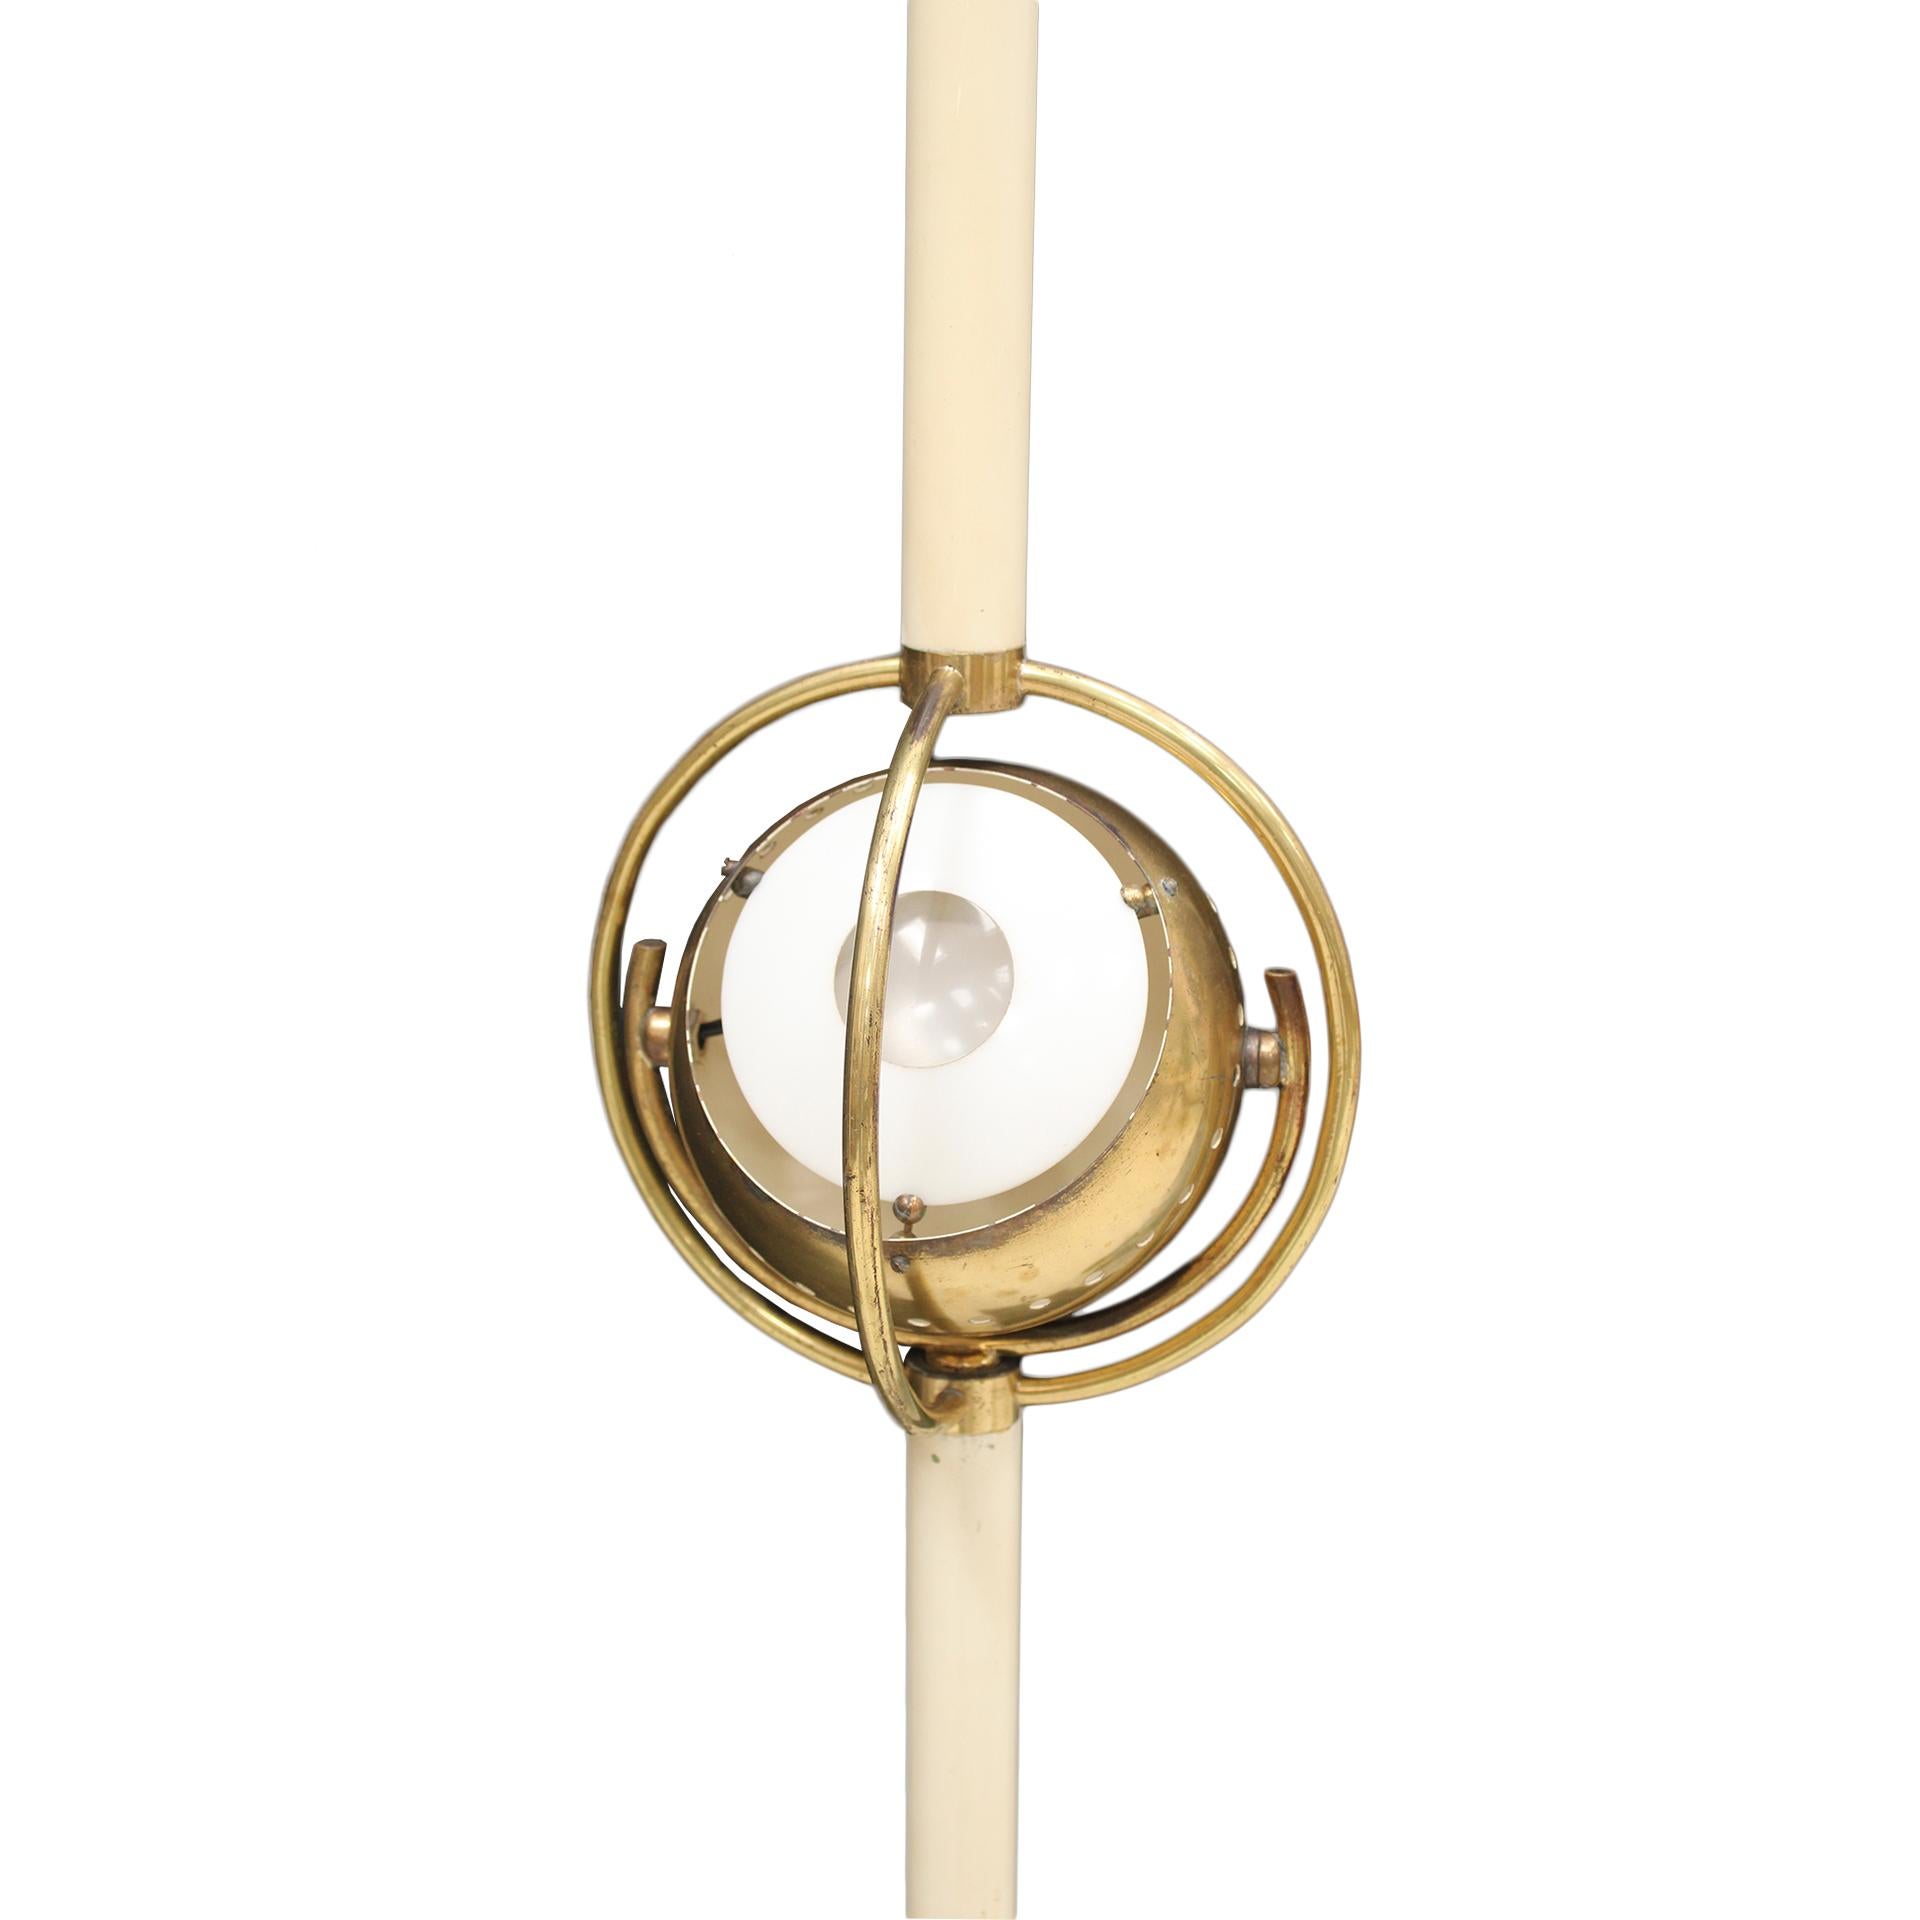 Polifemo Italian floor lamp, designed by Angelo Lelli, is a remarkable mid-century lighting fixture that exemplifies the iconic style of the designer. Lelli, known for his innovative approach to modern lighting design, created a piece that